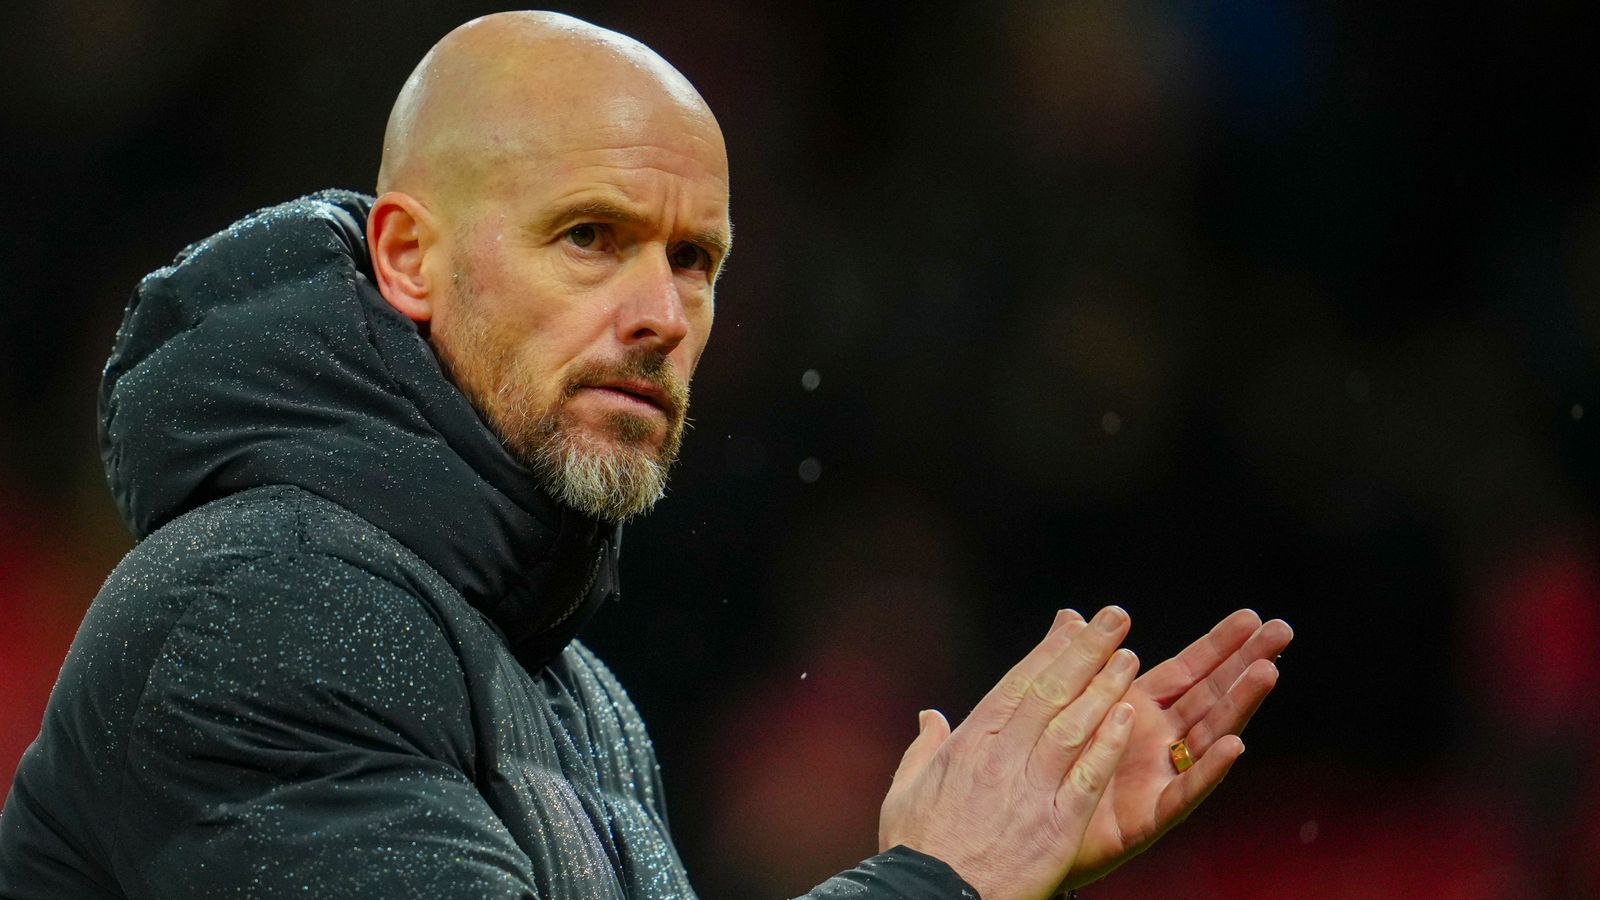 Manchester United must stick with manager Erik ten Hag - sacking him would solve nothing, says Gary Neville | Football News